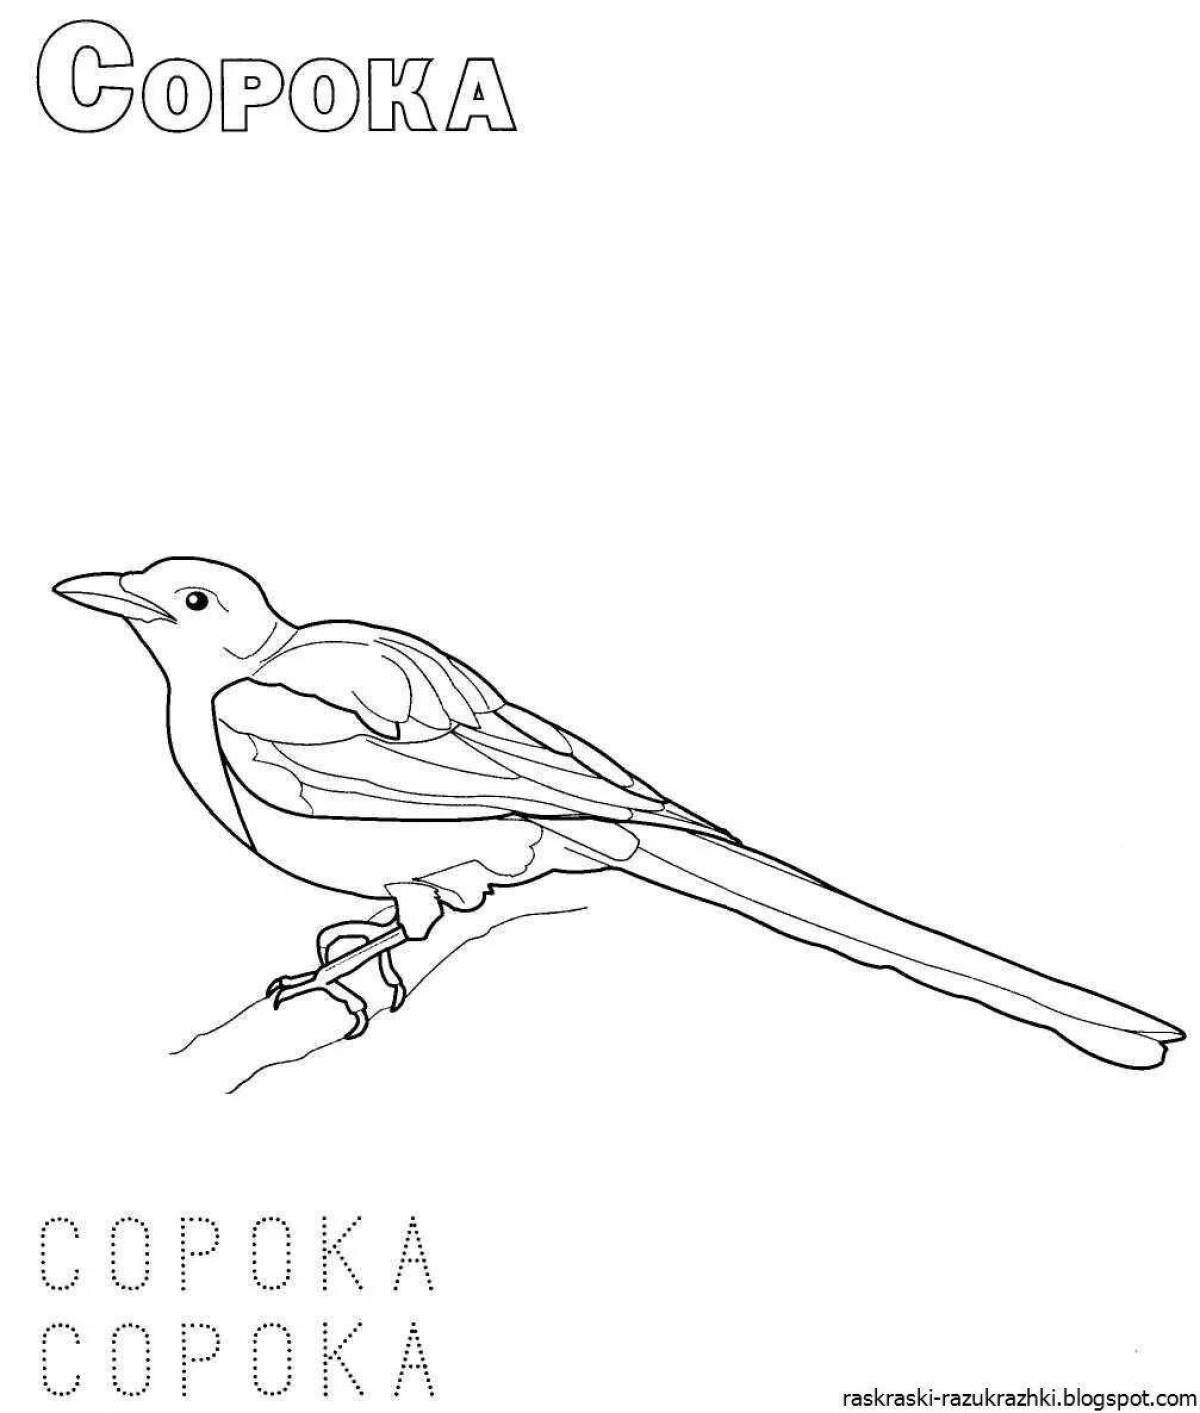 Adorable magpie coloring book for kids 3-4 years old